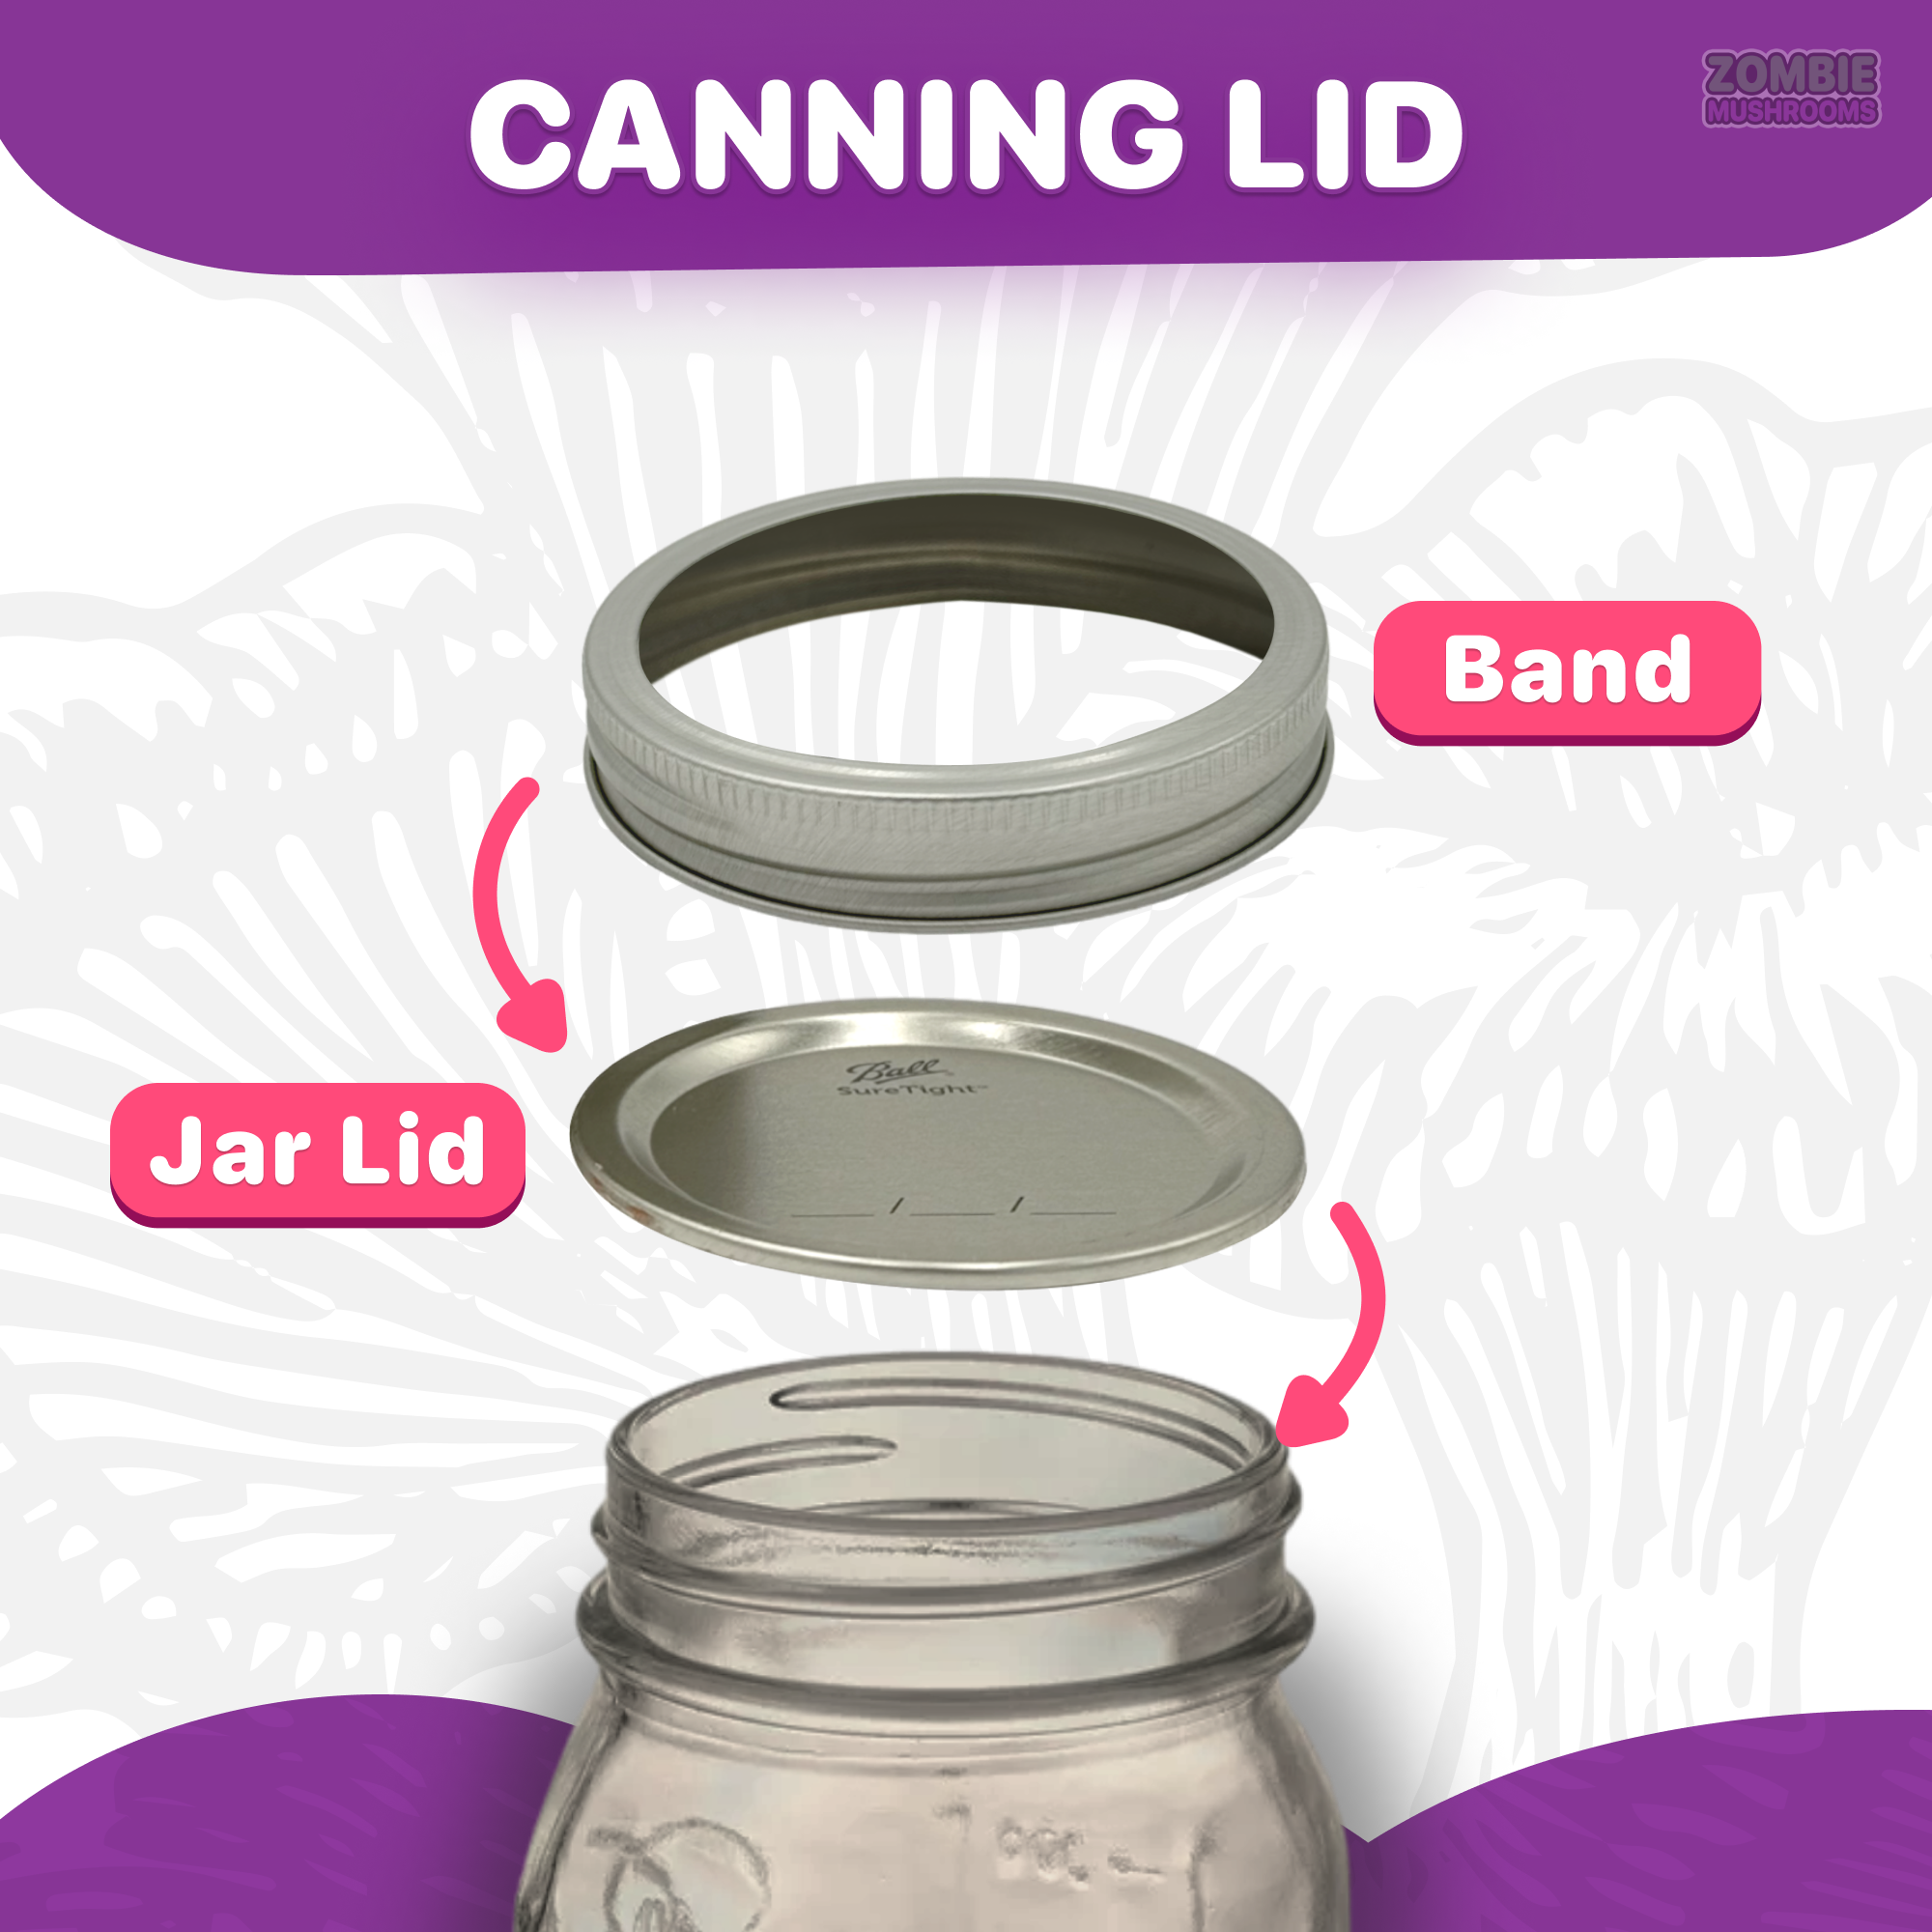 an image of canning lid - showing band and jar lid